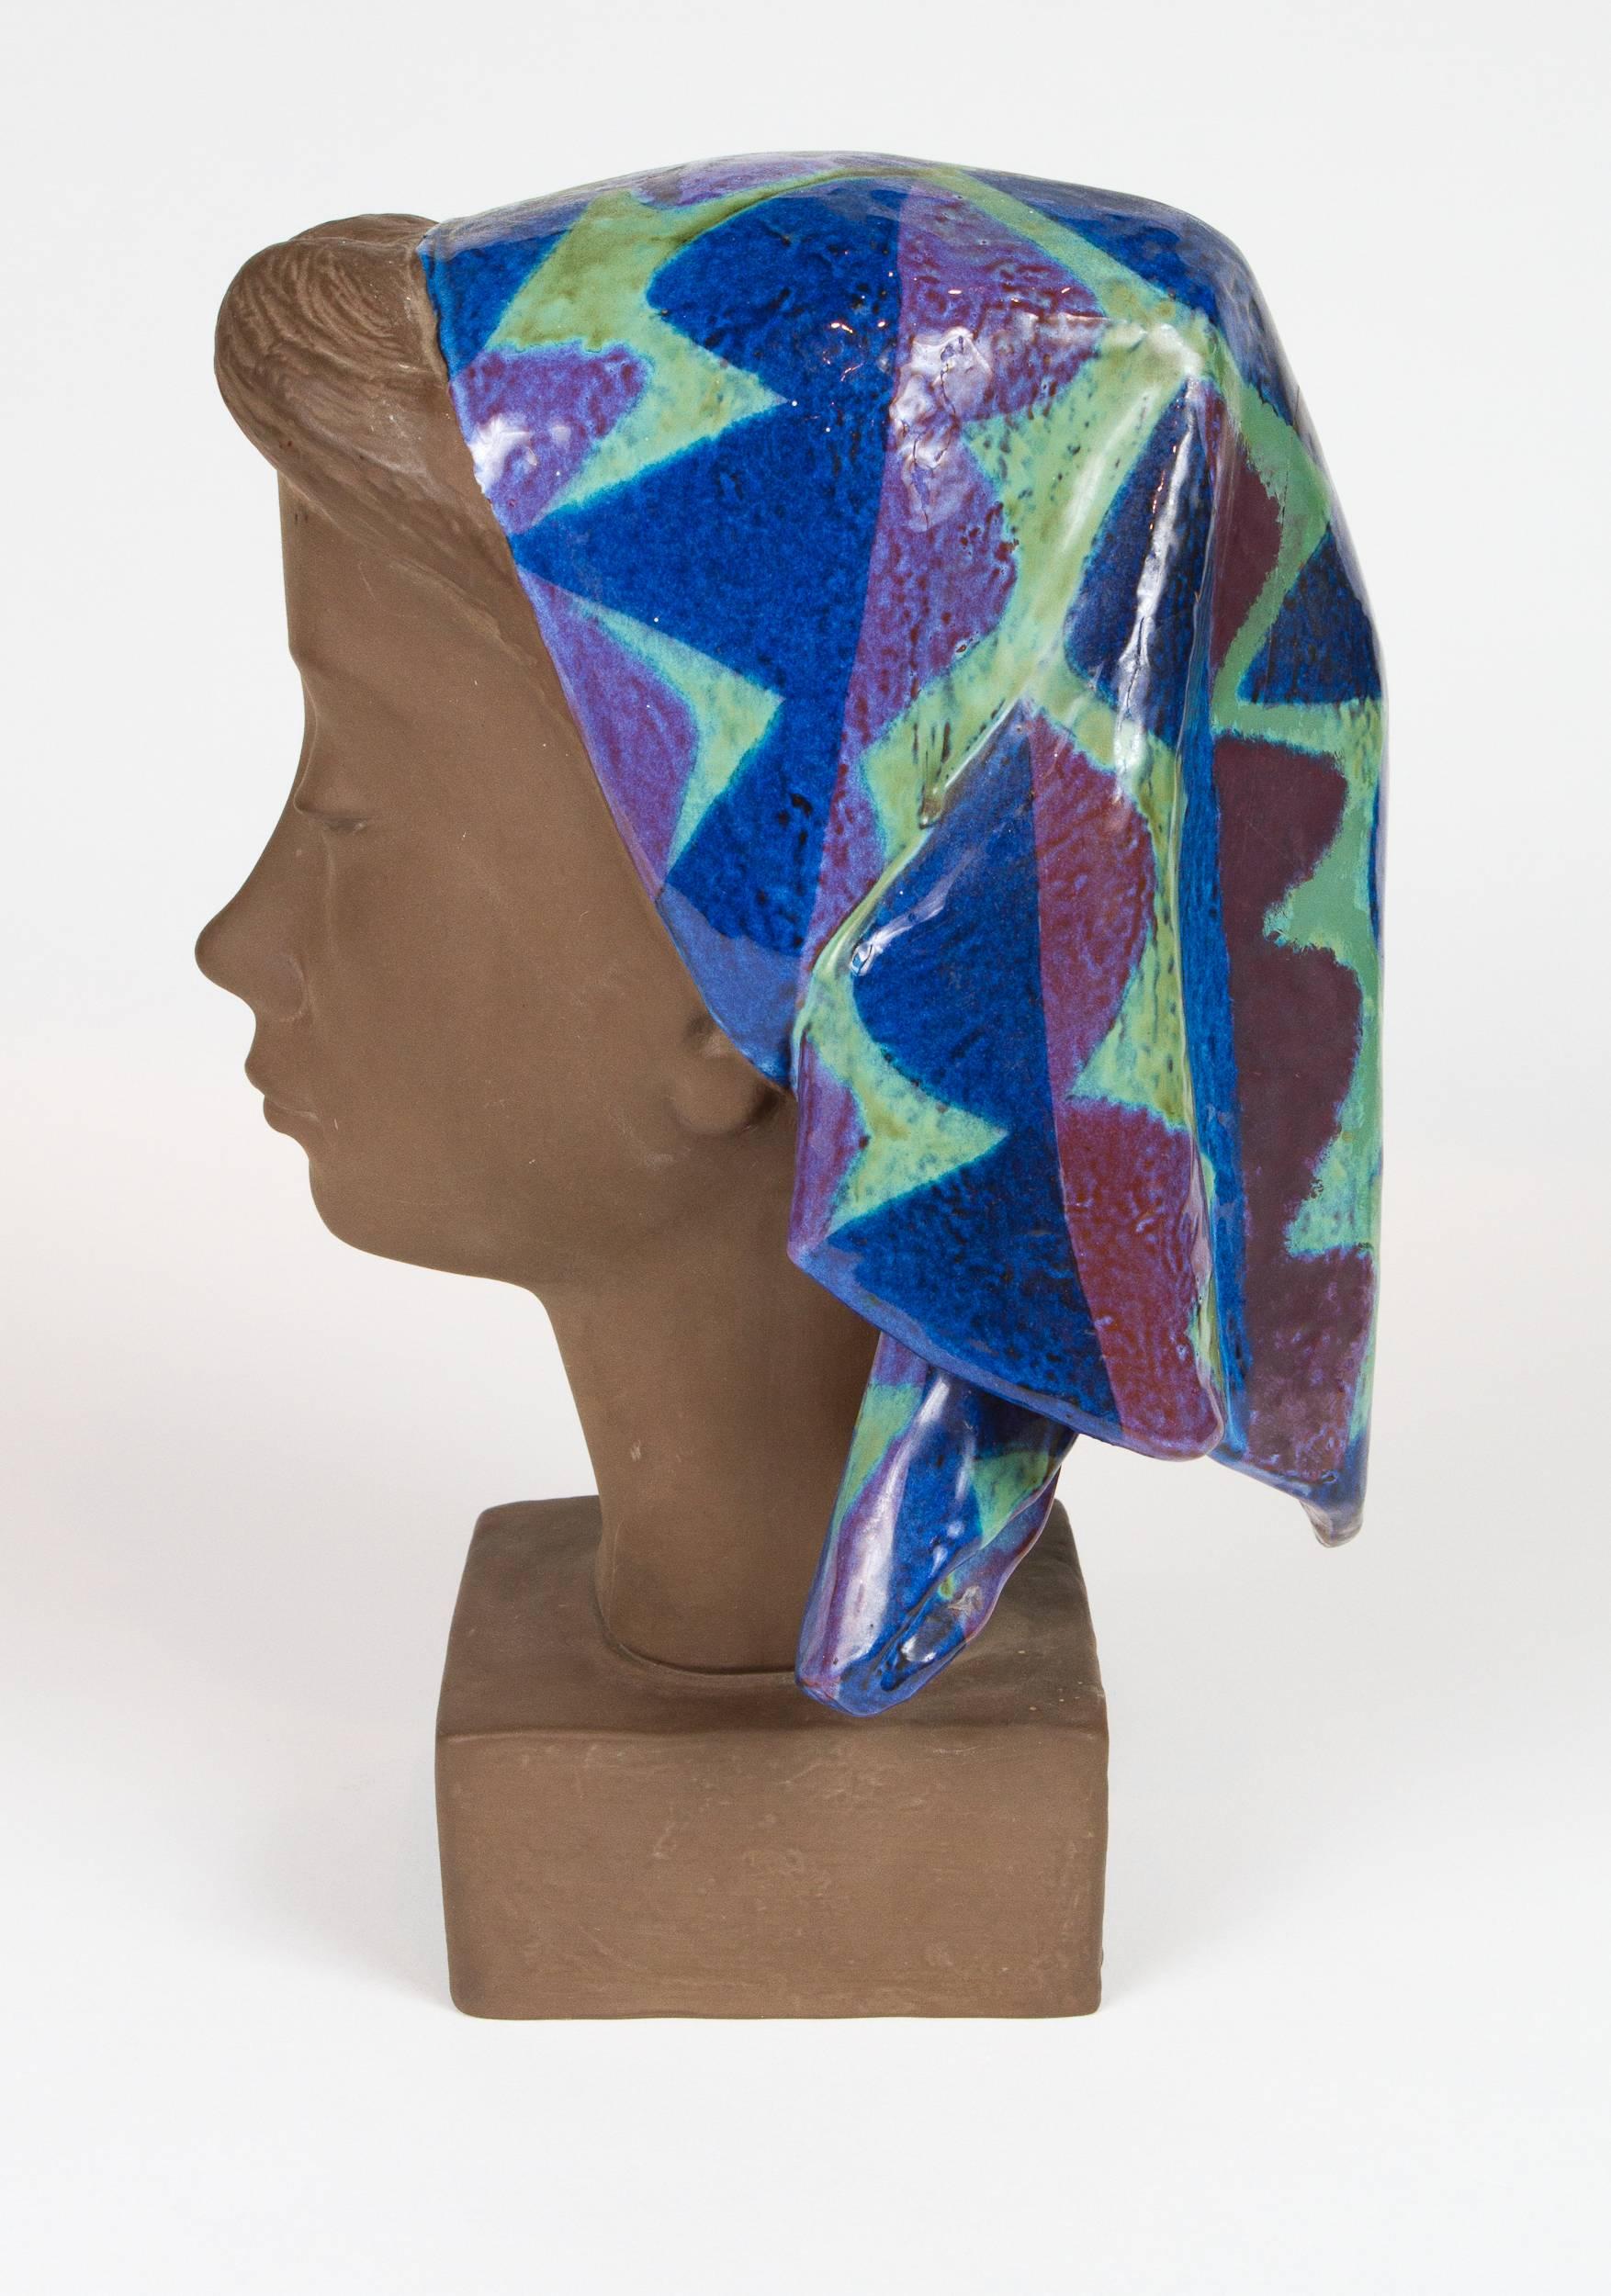 Mid-20th Century Ceramic Sculpture of a Woman Wearing Colored Scarf by Johannes Hedegaard For Sale